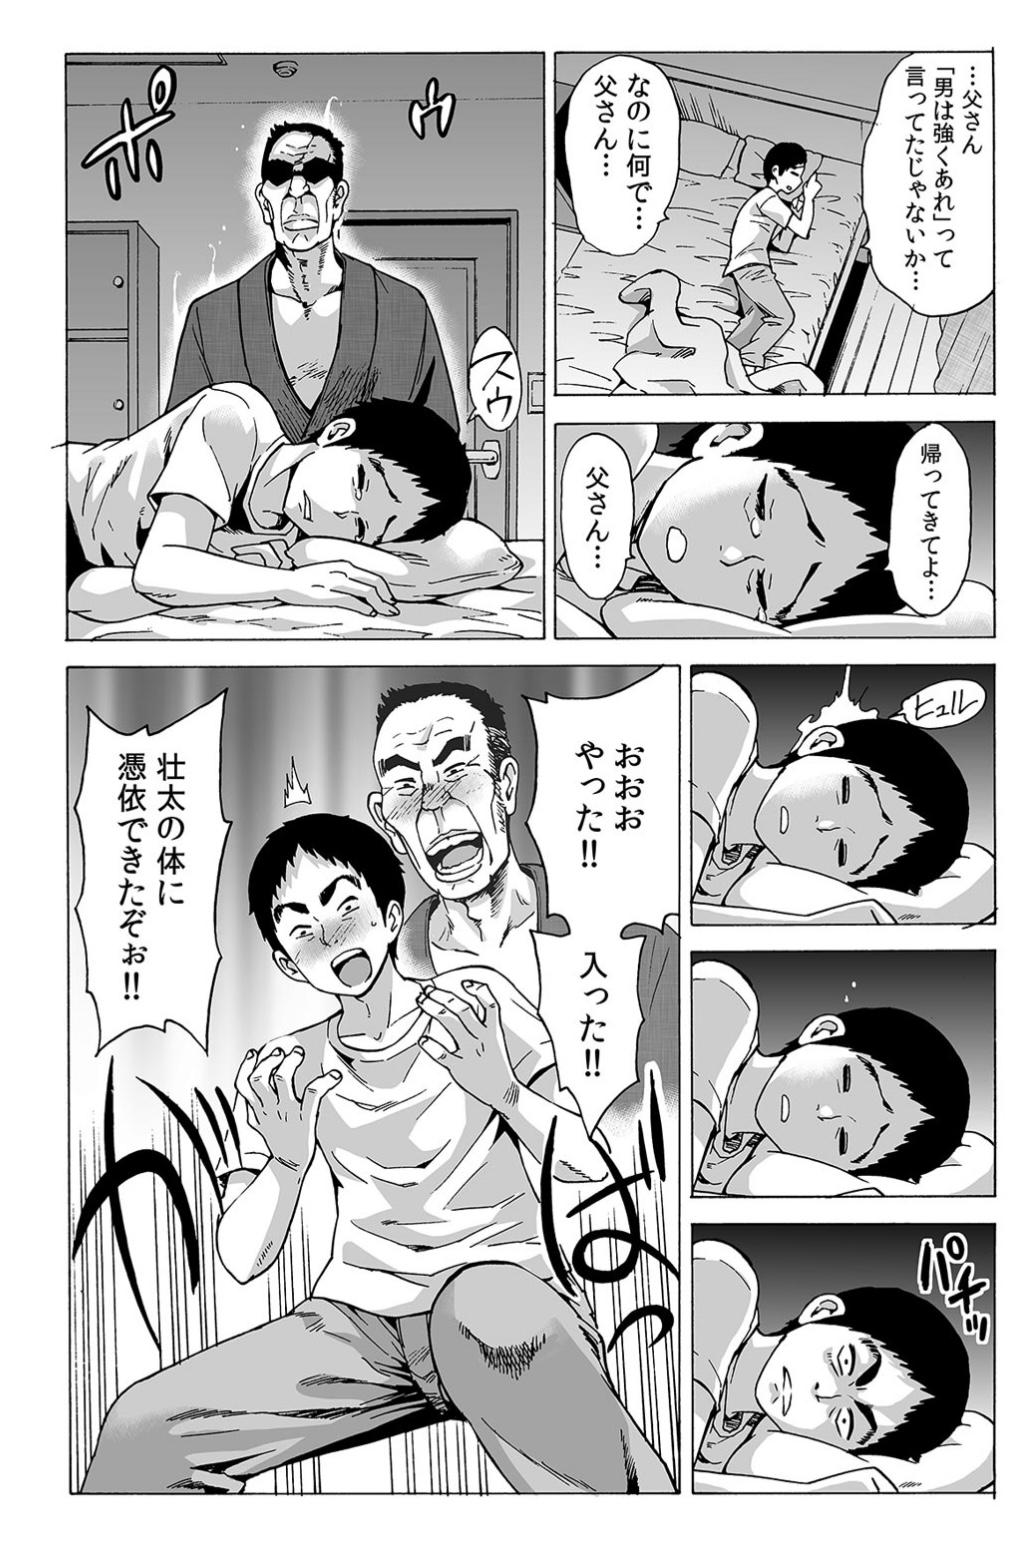 [Motaro / Akahige] My first partner is ... my father-in-law!? 1 5